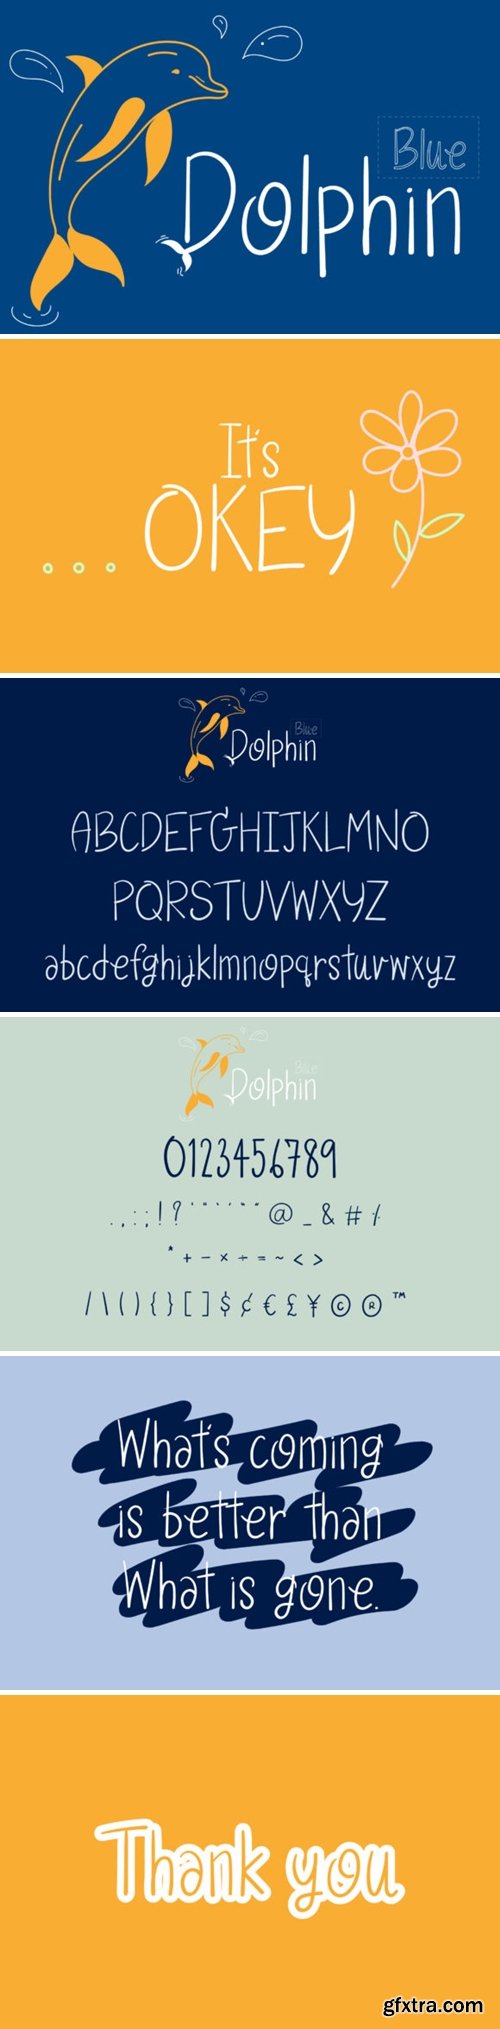 Dolphin Font